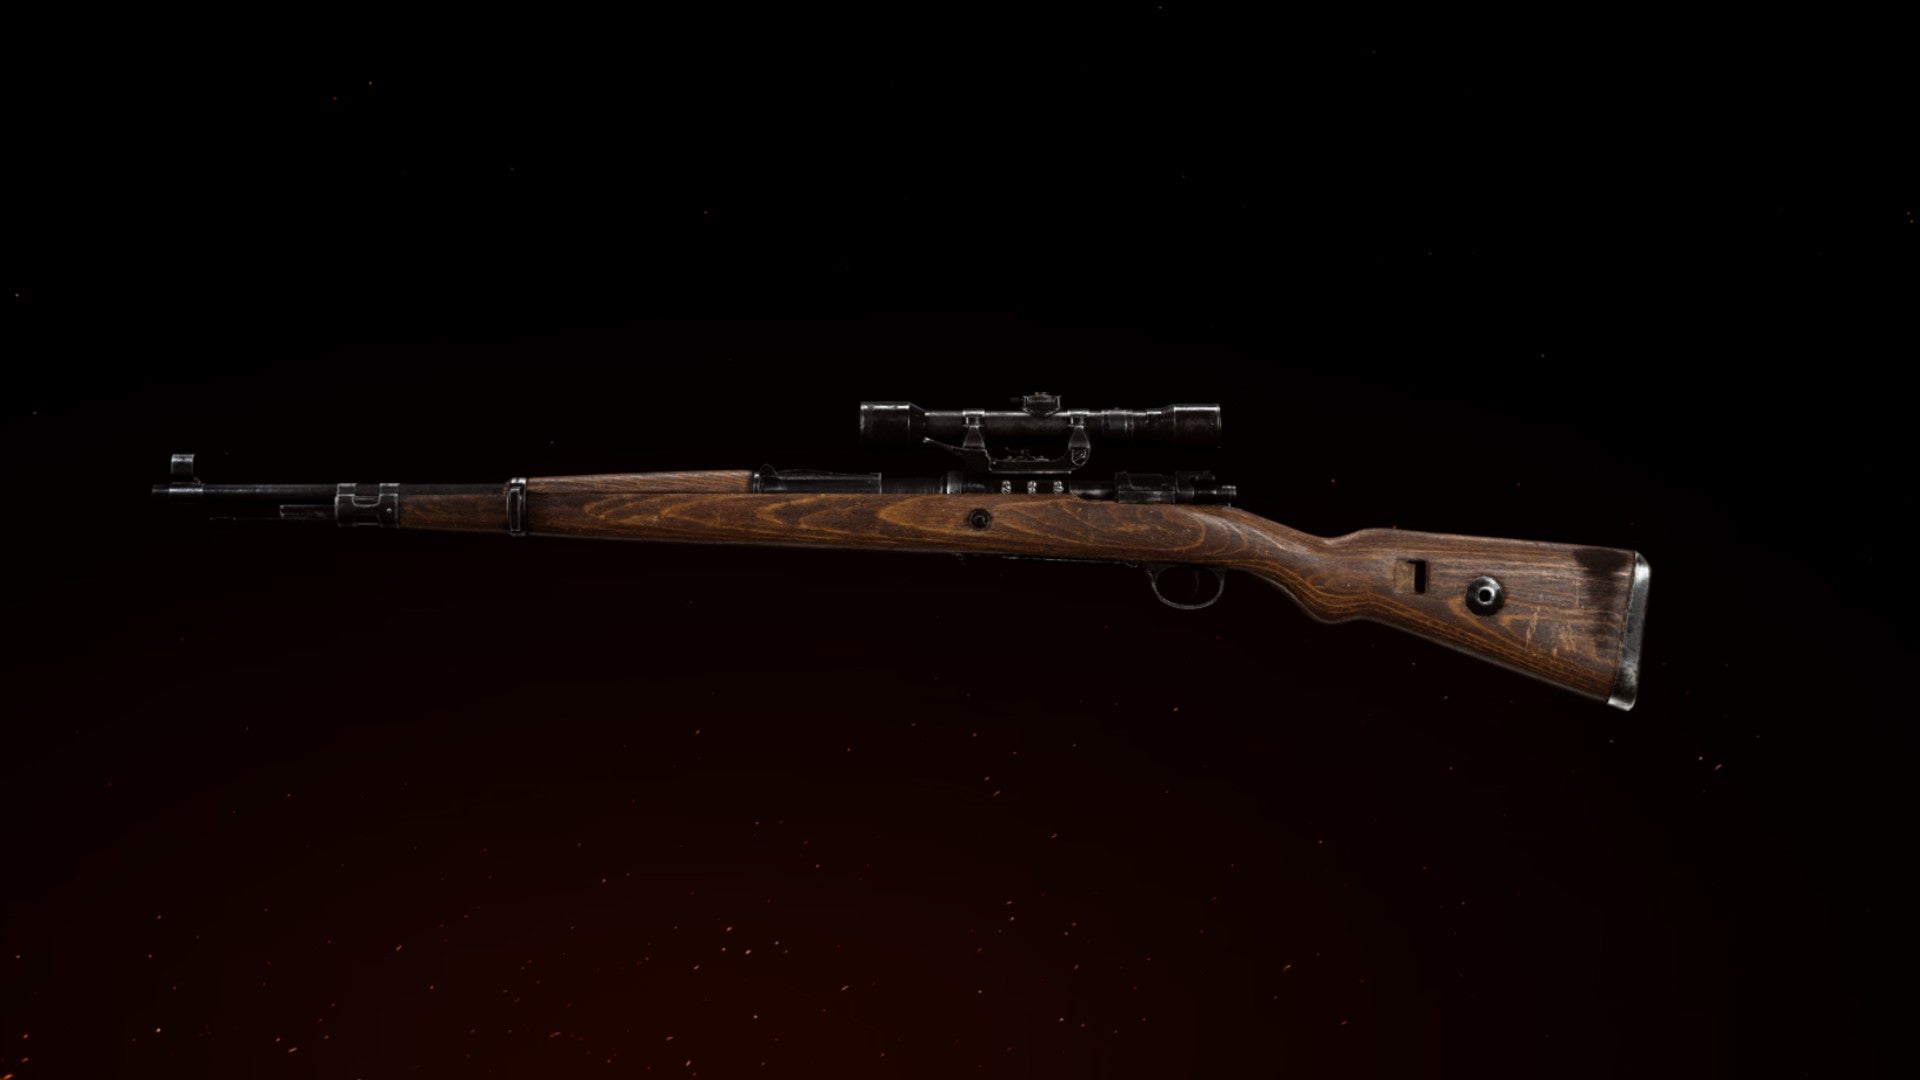 Kar98k in the COD Vanguard weapon preview screen in the gunsmith. Dark background with fiery red hue in lower left corner.